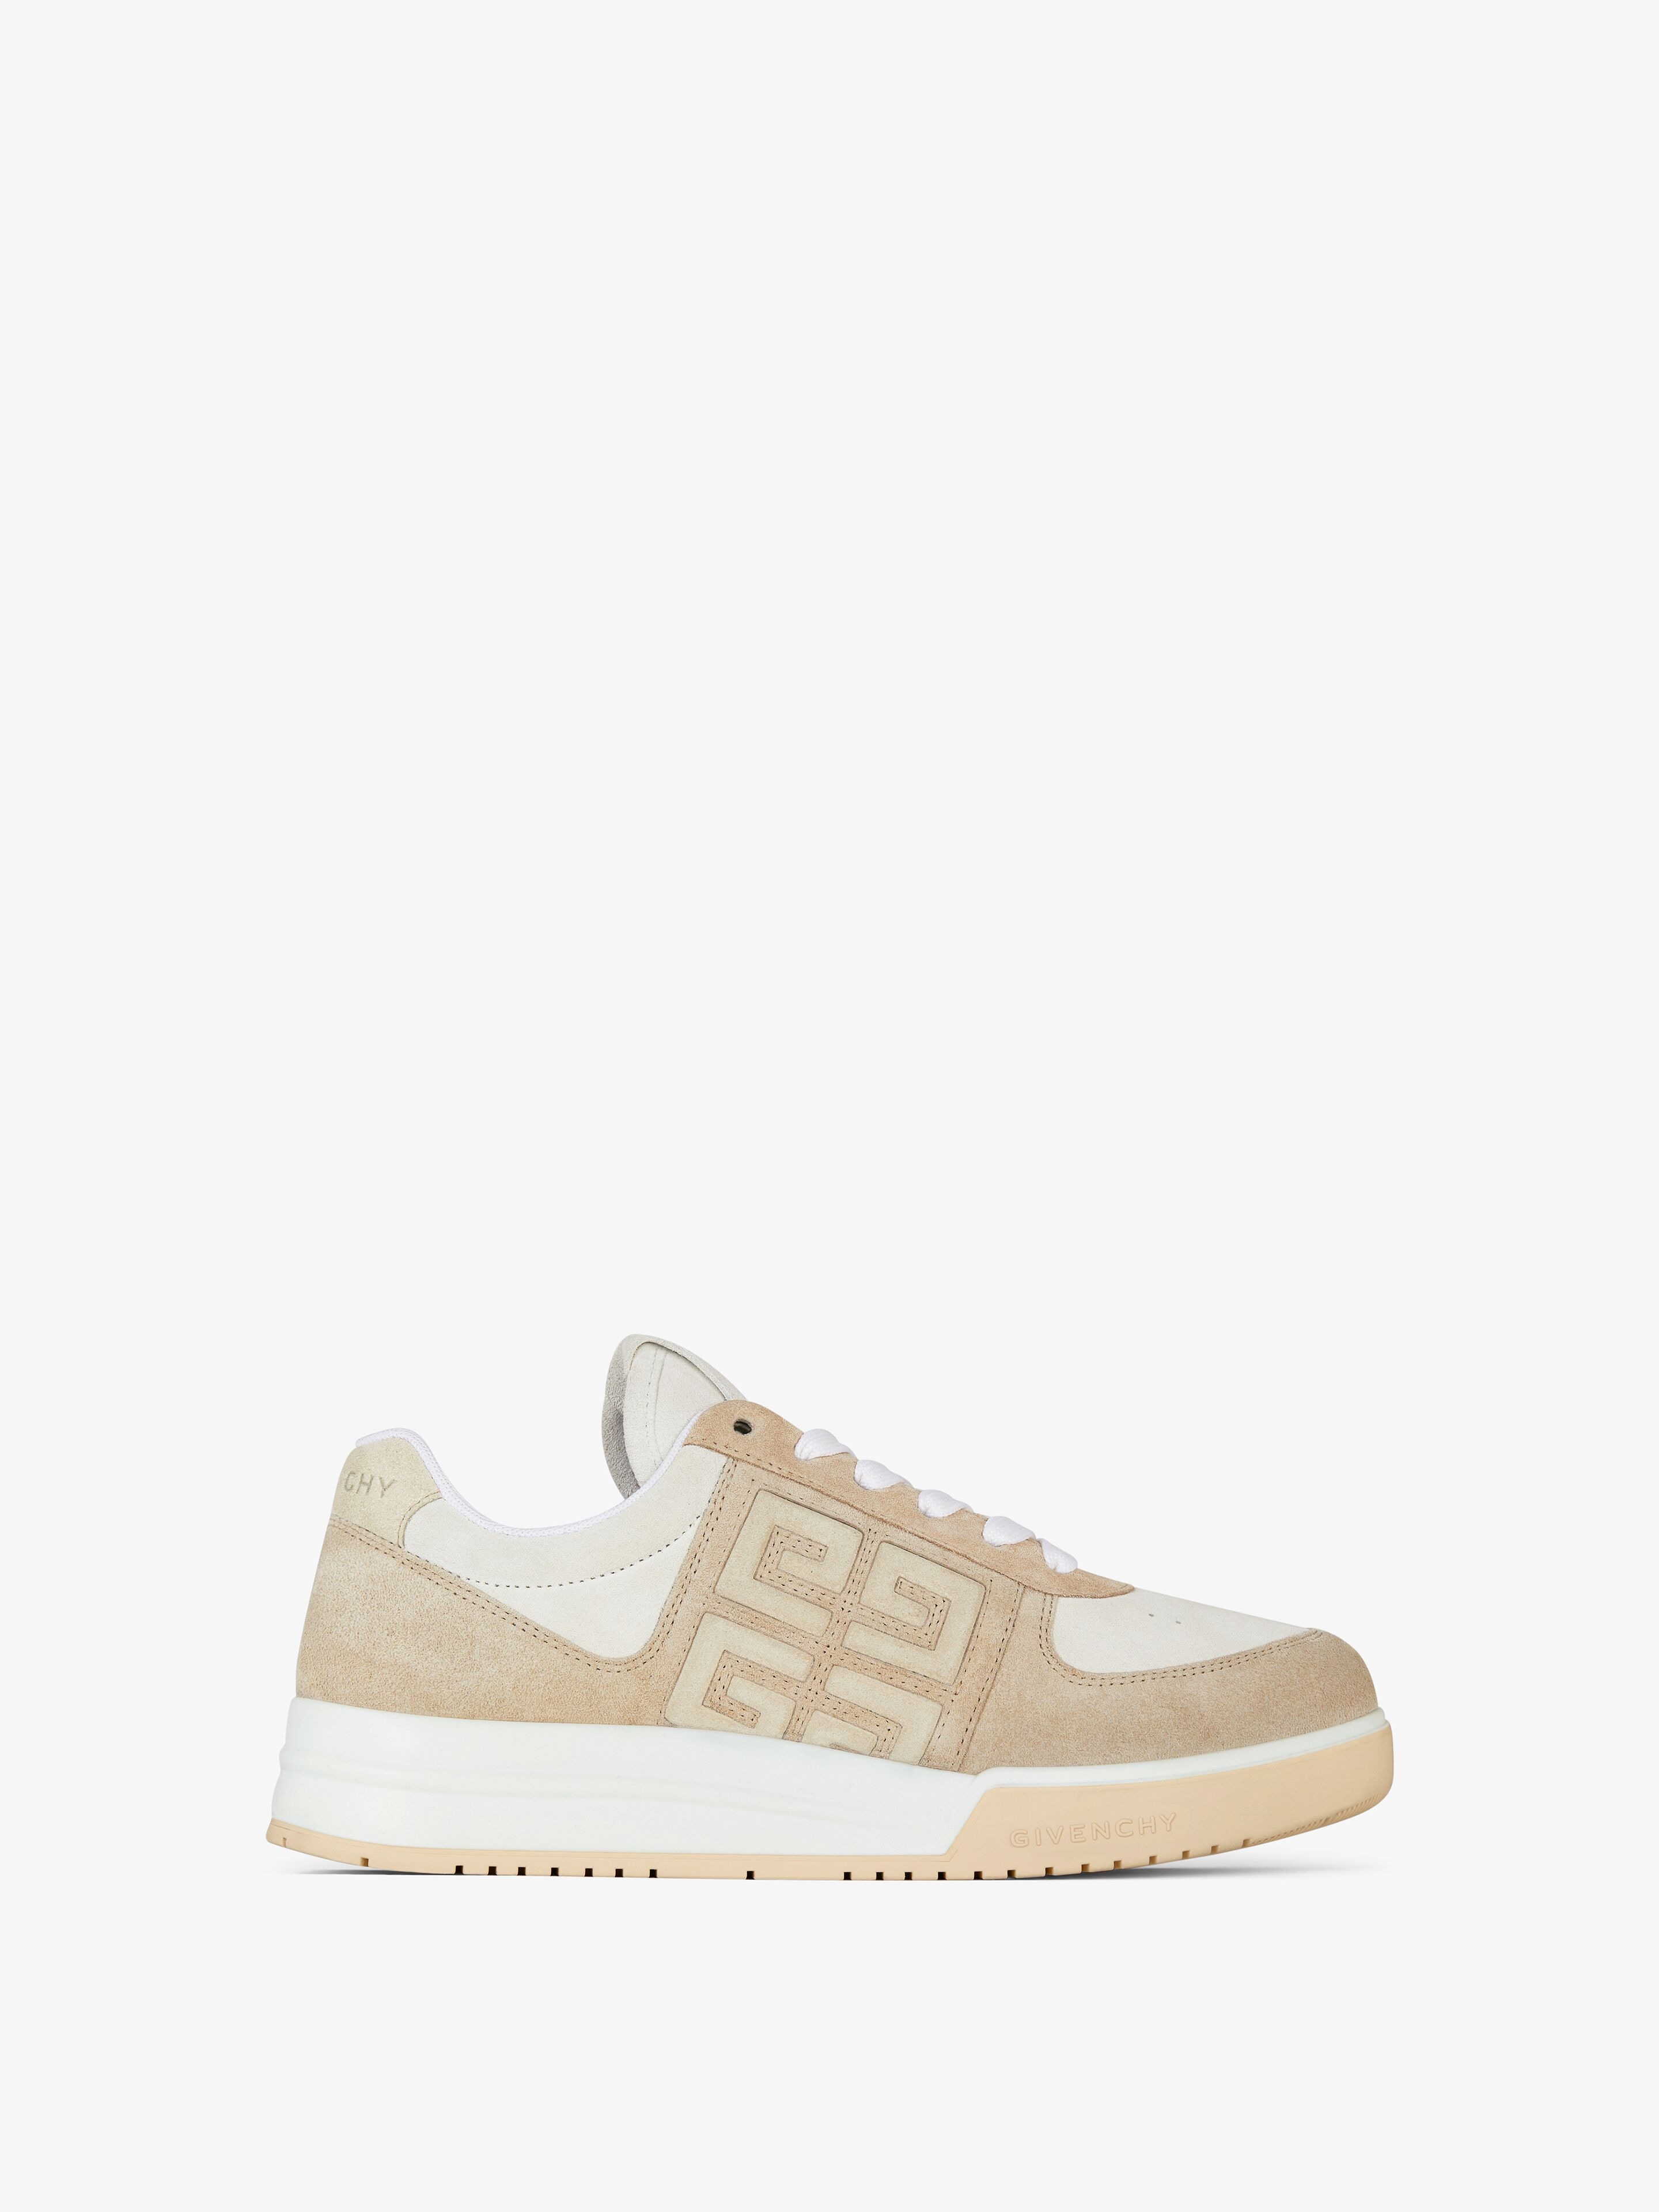 Givenchy G4 Sneakers In Suede In Beige/white